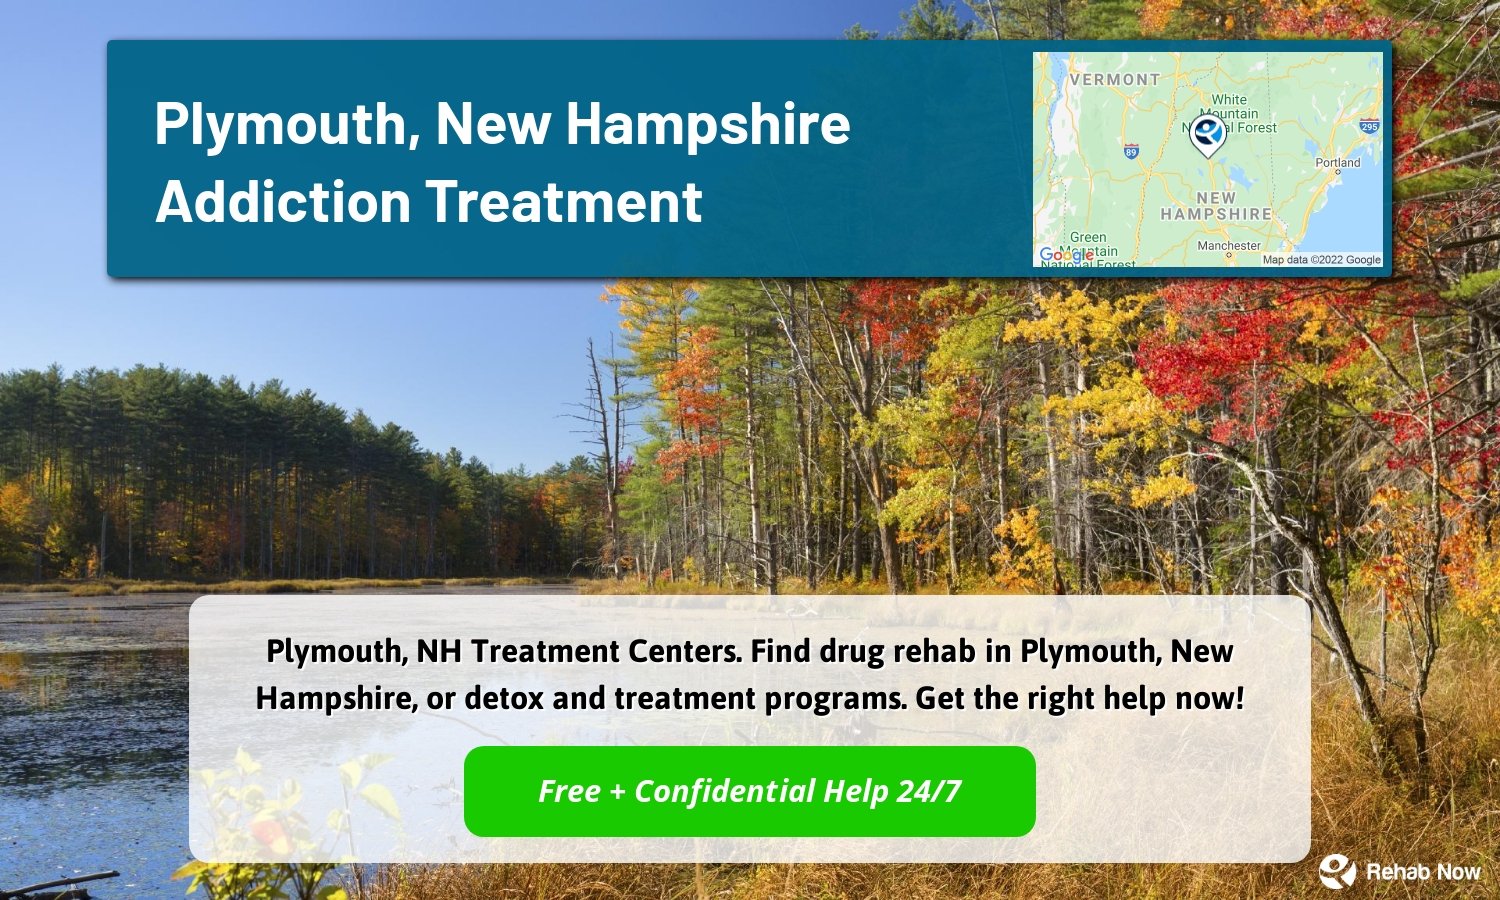 Plymouth, NH Treatment Centers. Find drug rehab in Plymouth, New Hampshire, or detox and treatment programs. Get the right help now!